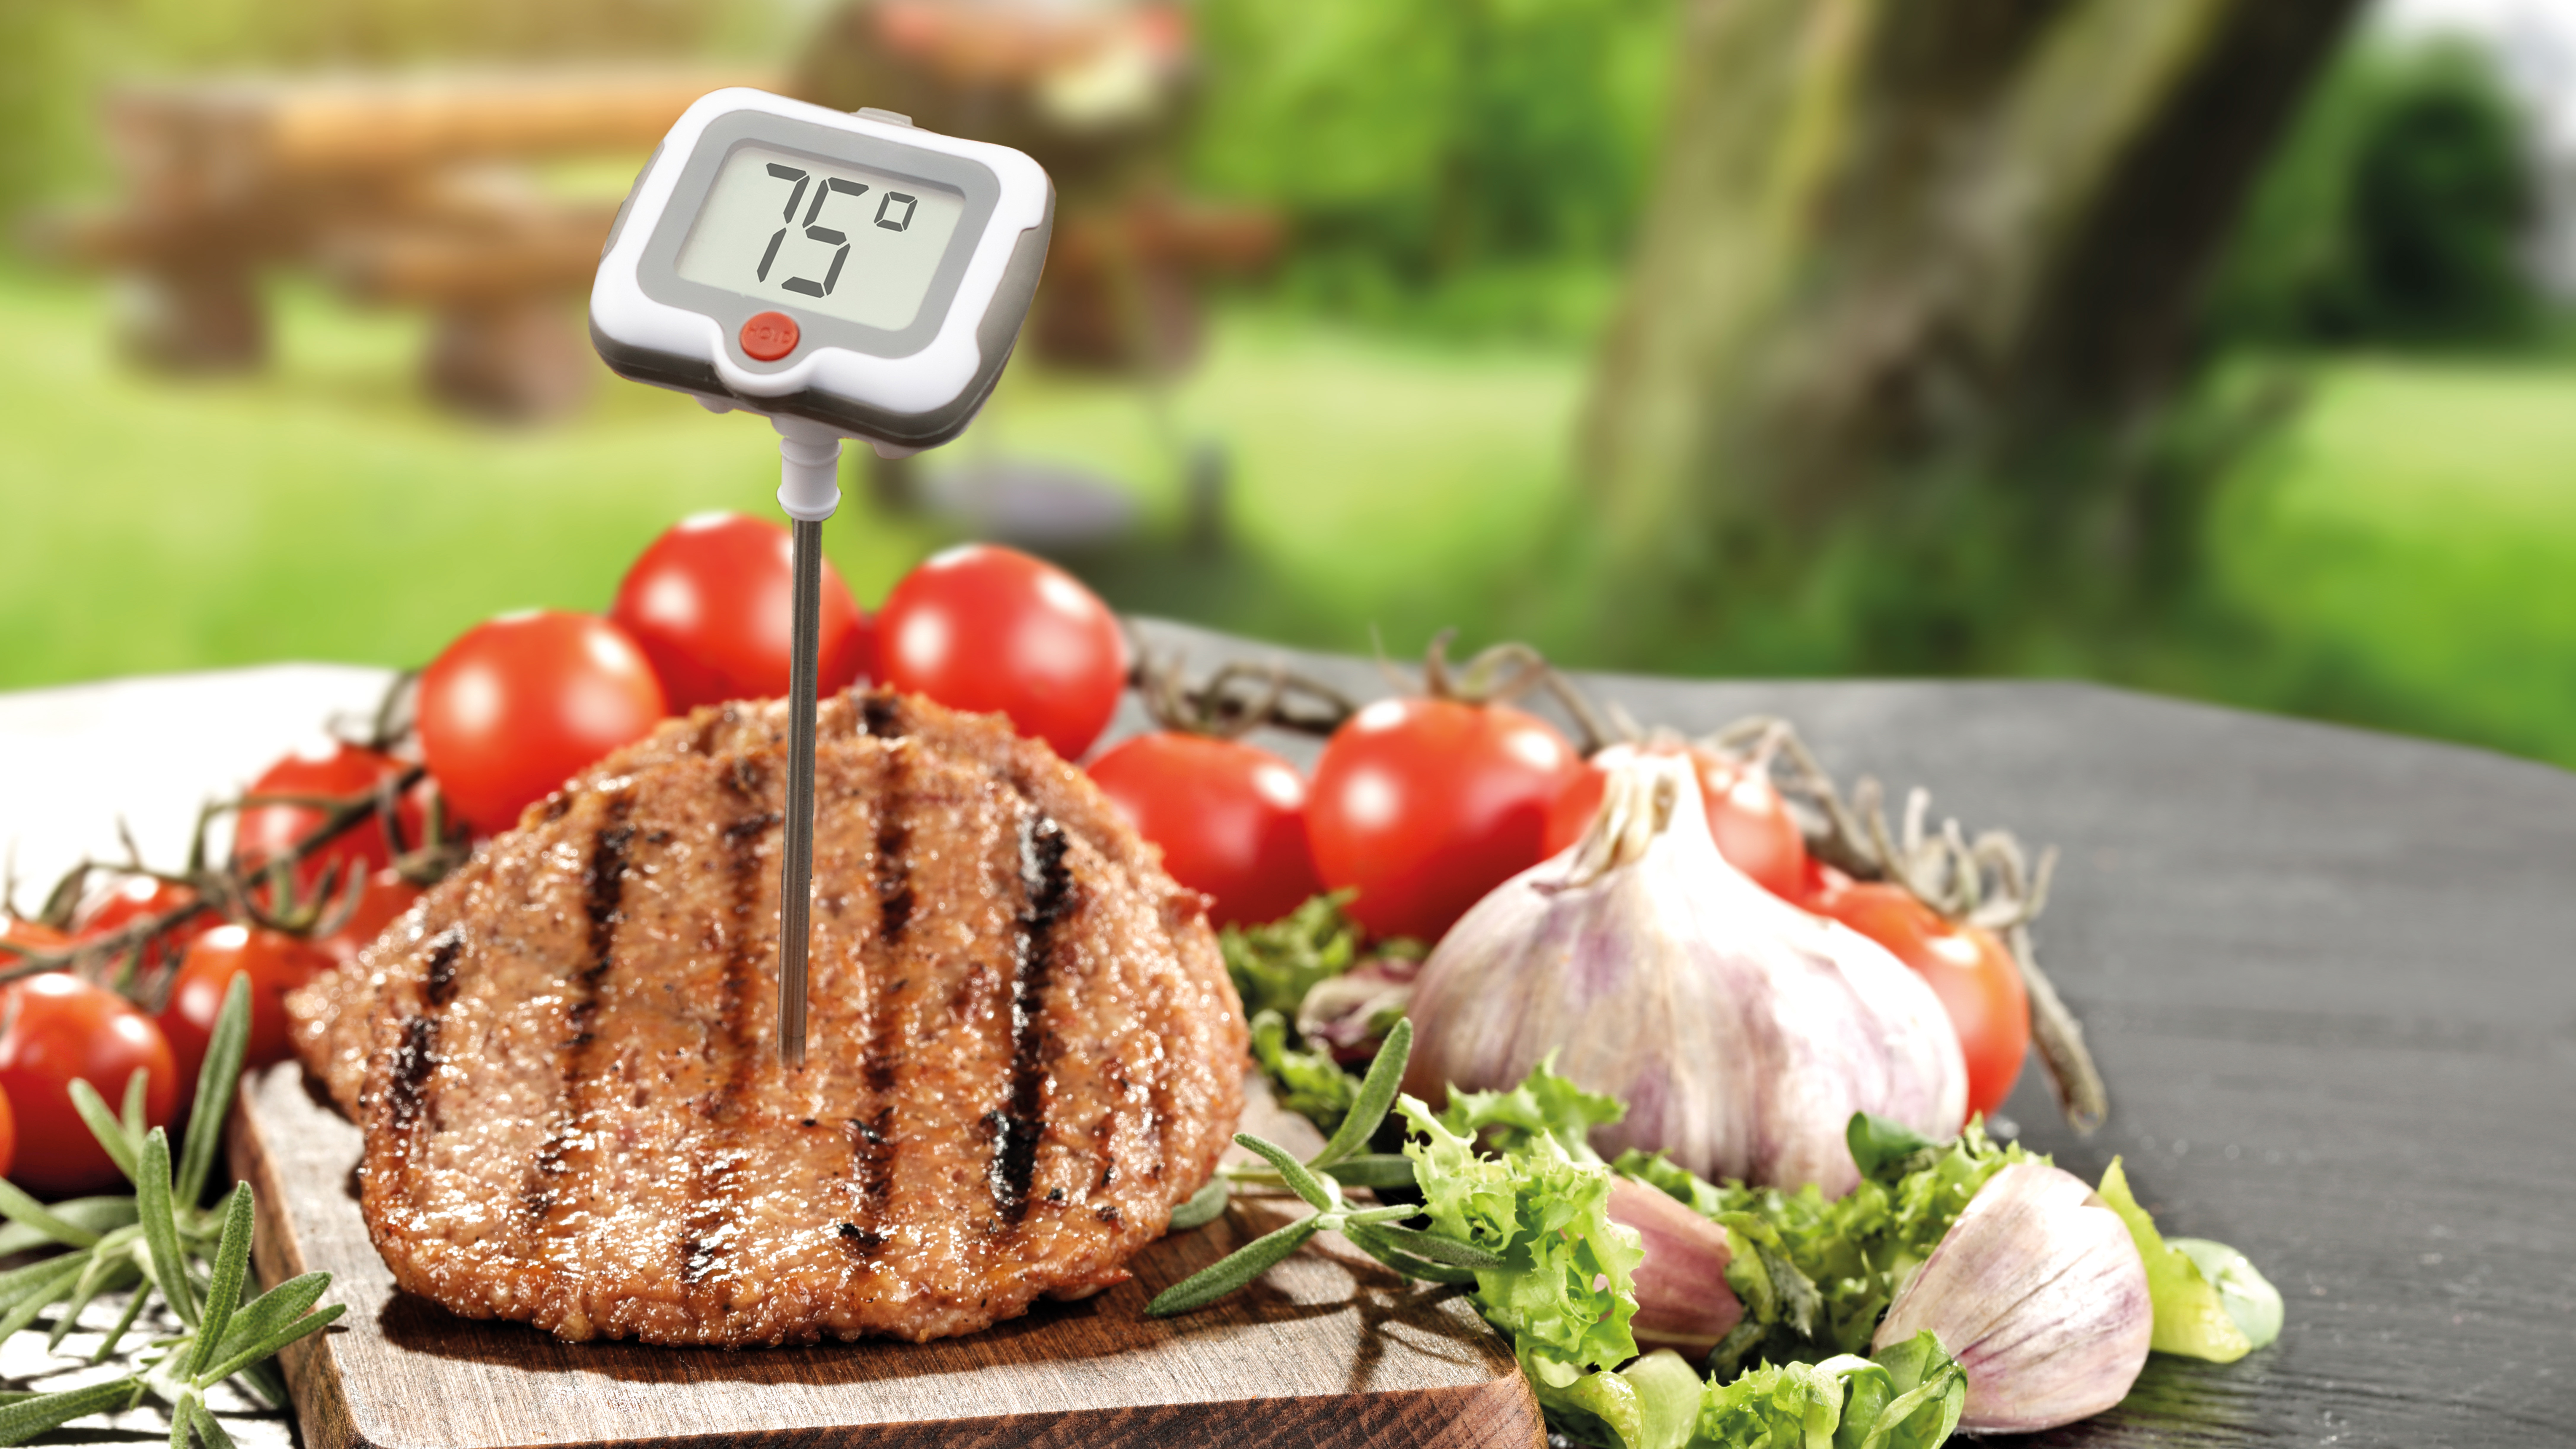 Hot Tips For Cooking With A Food Thermometer